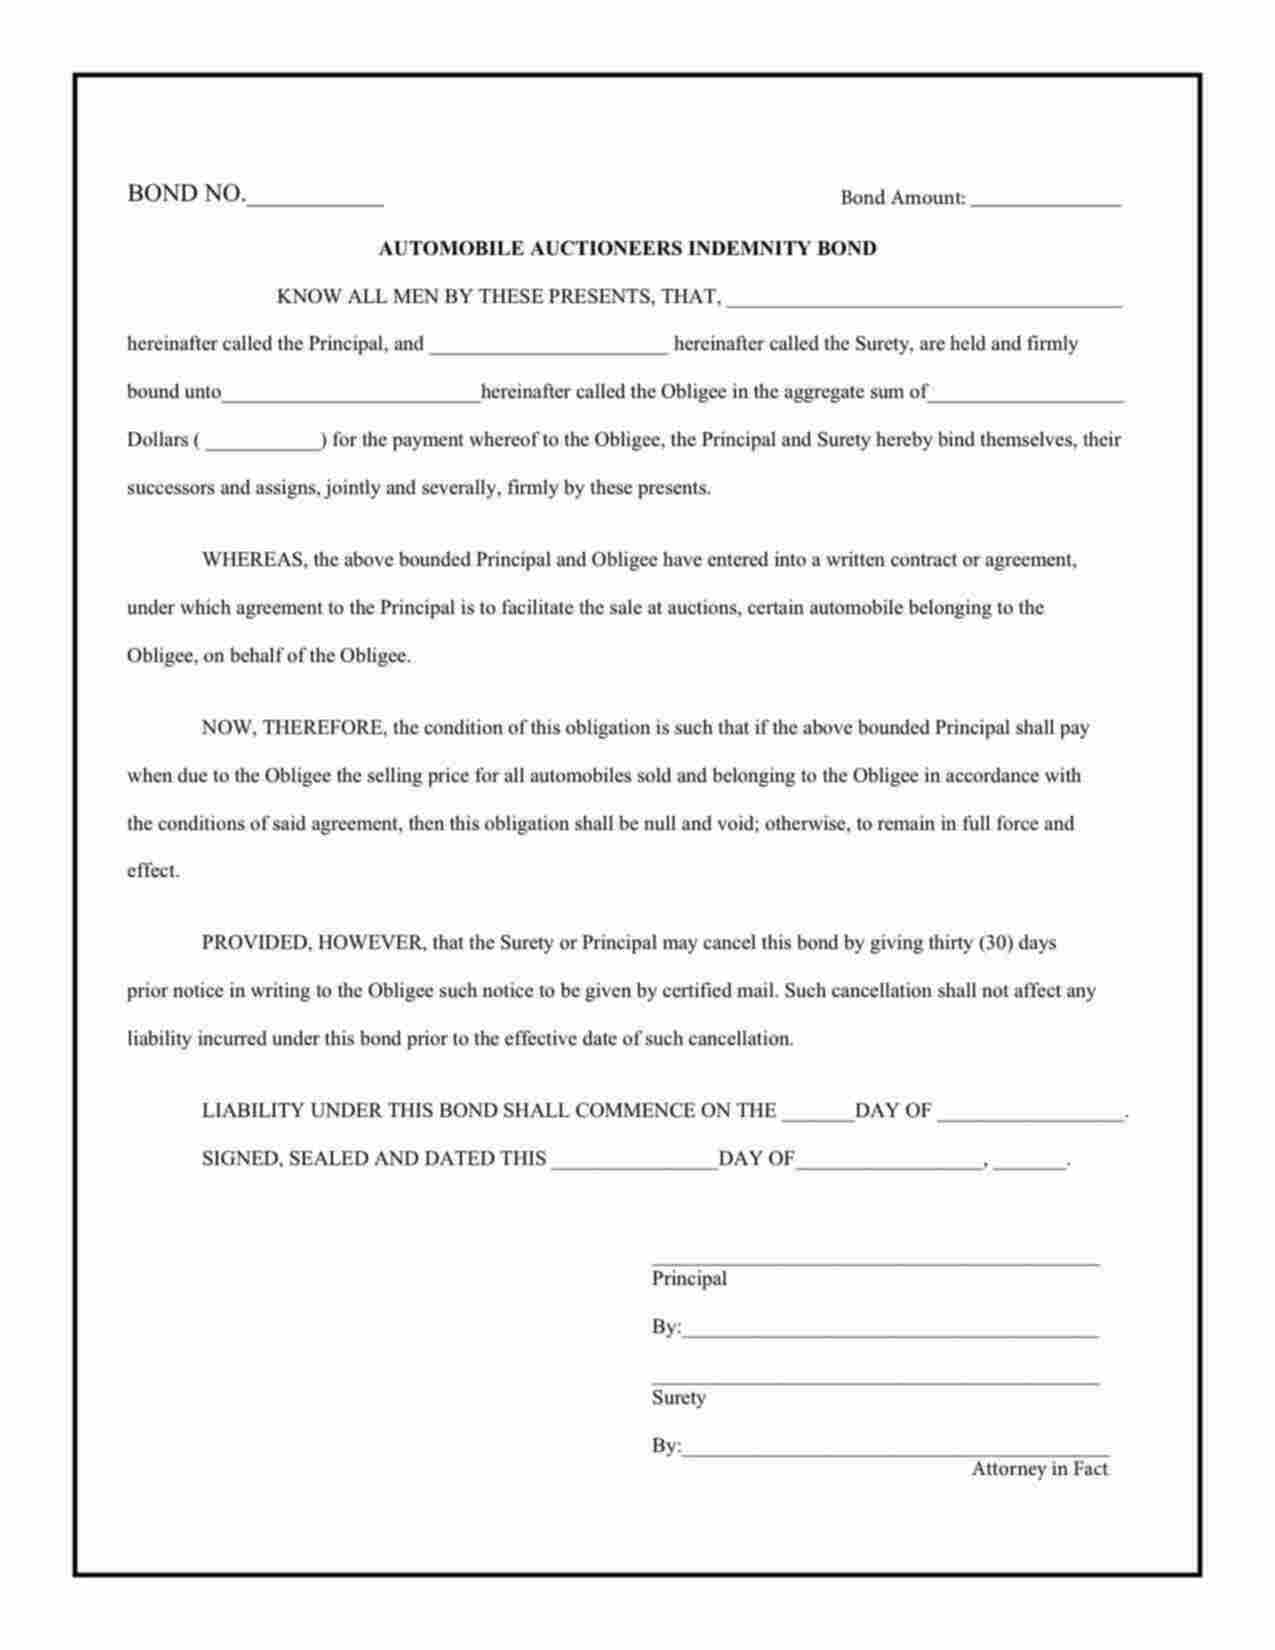 New Jersey Automobile Auctioneers Indemnity Bond Form